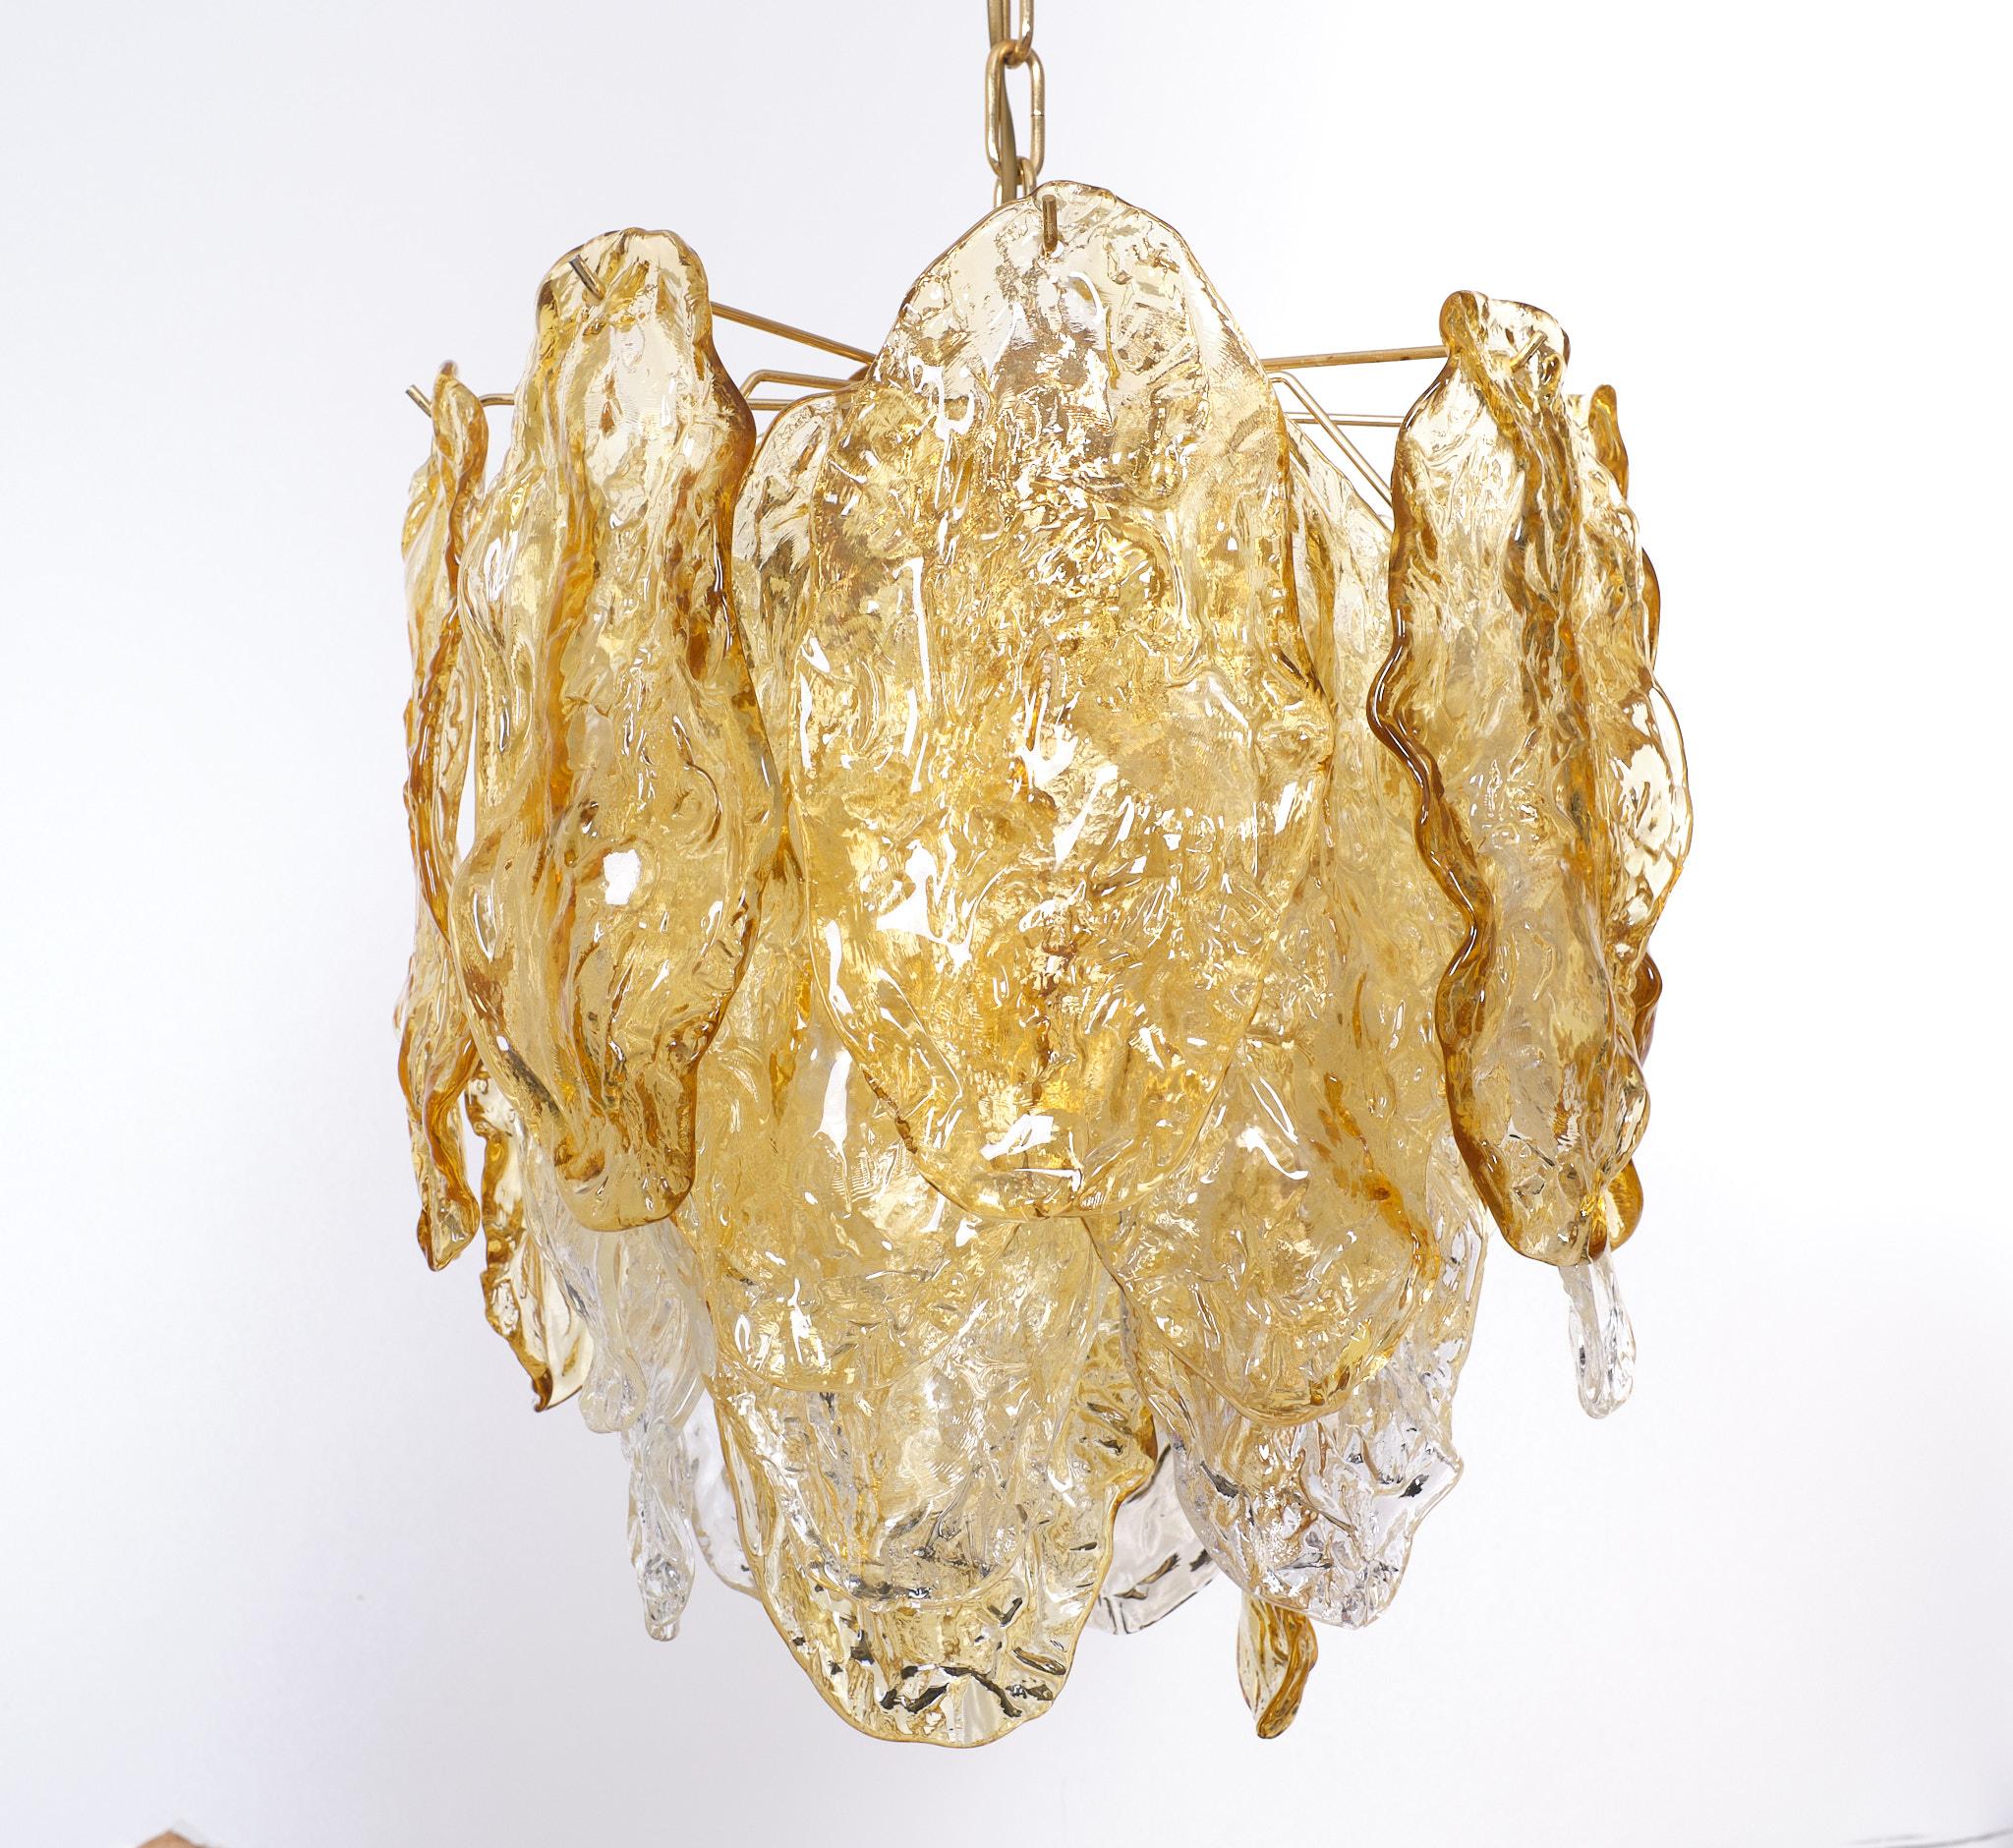 Stunning Mazzega chandelier. Brass armature, comes with 26 murano glass 
panels. Because the shape of the panels. Its create movement in the chandelier.
Also the colors gives that effect. 4 Large E27 bulbs needed. No defects. Good condition.